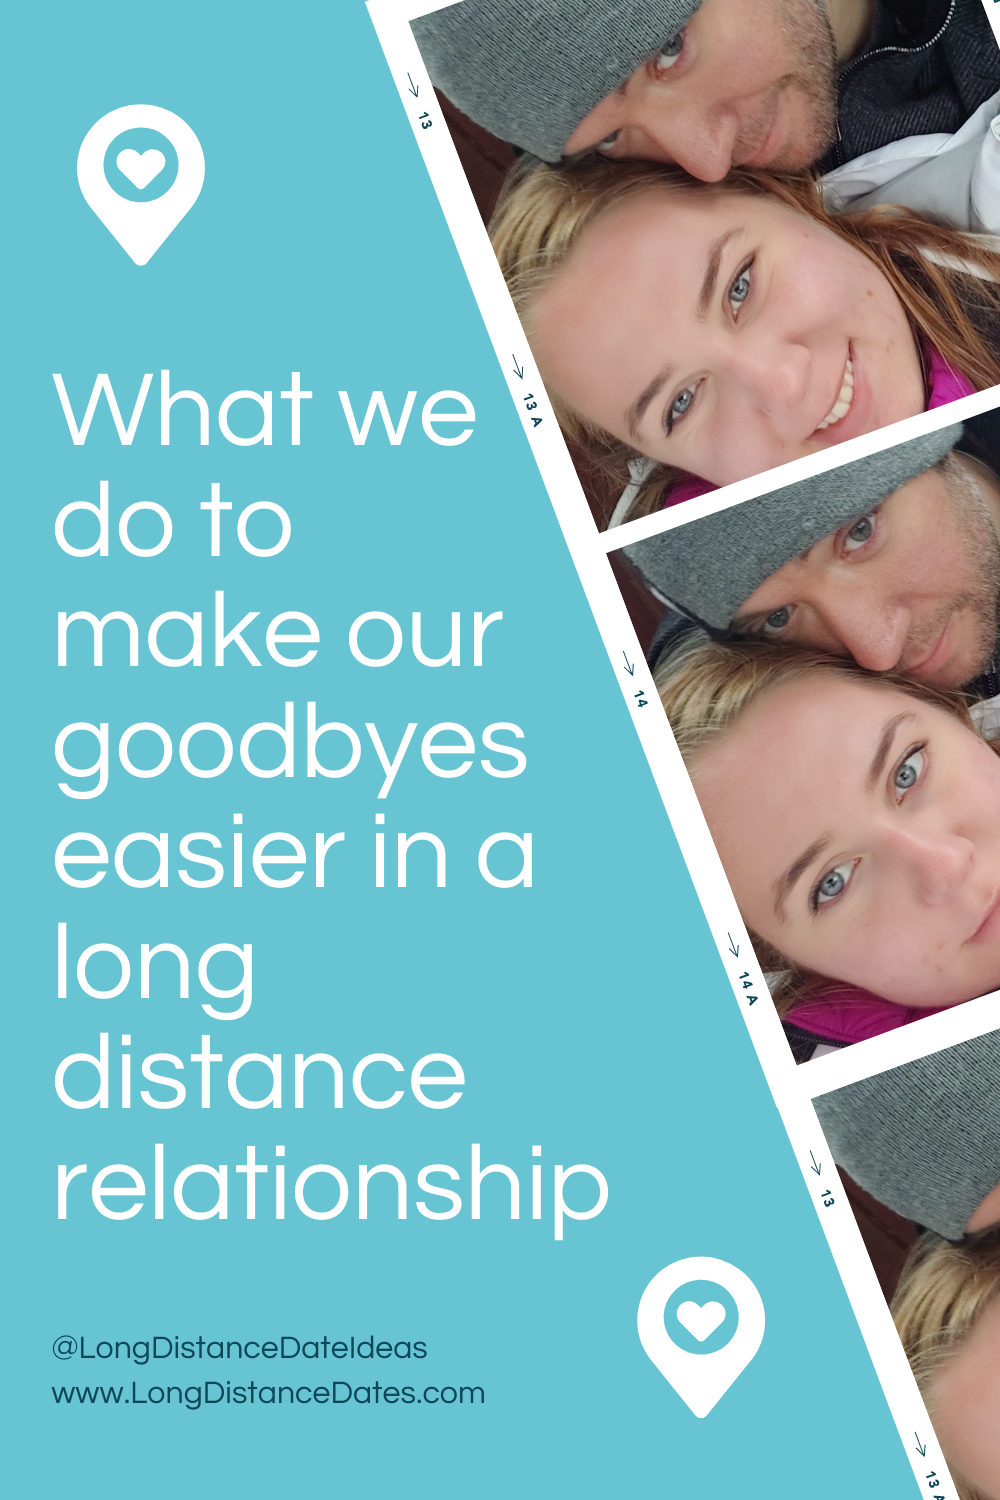 How to say goodbye in a long-distance relationship